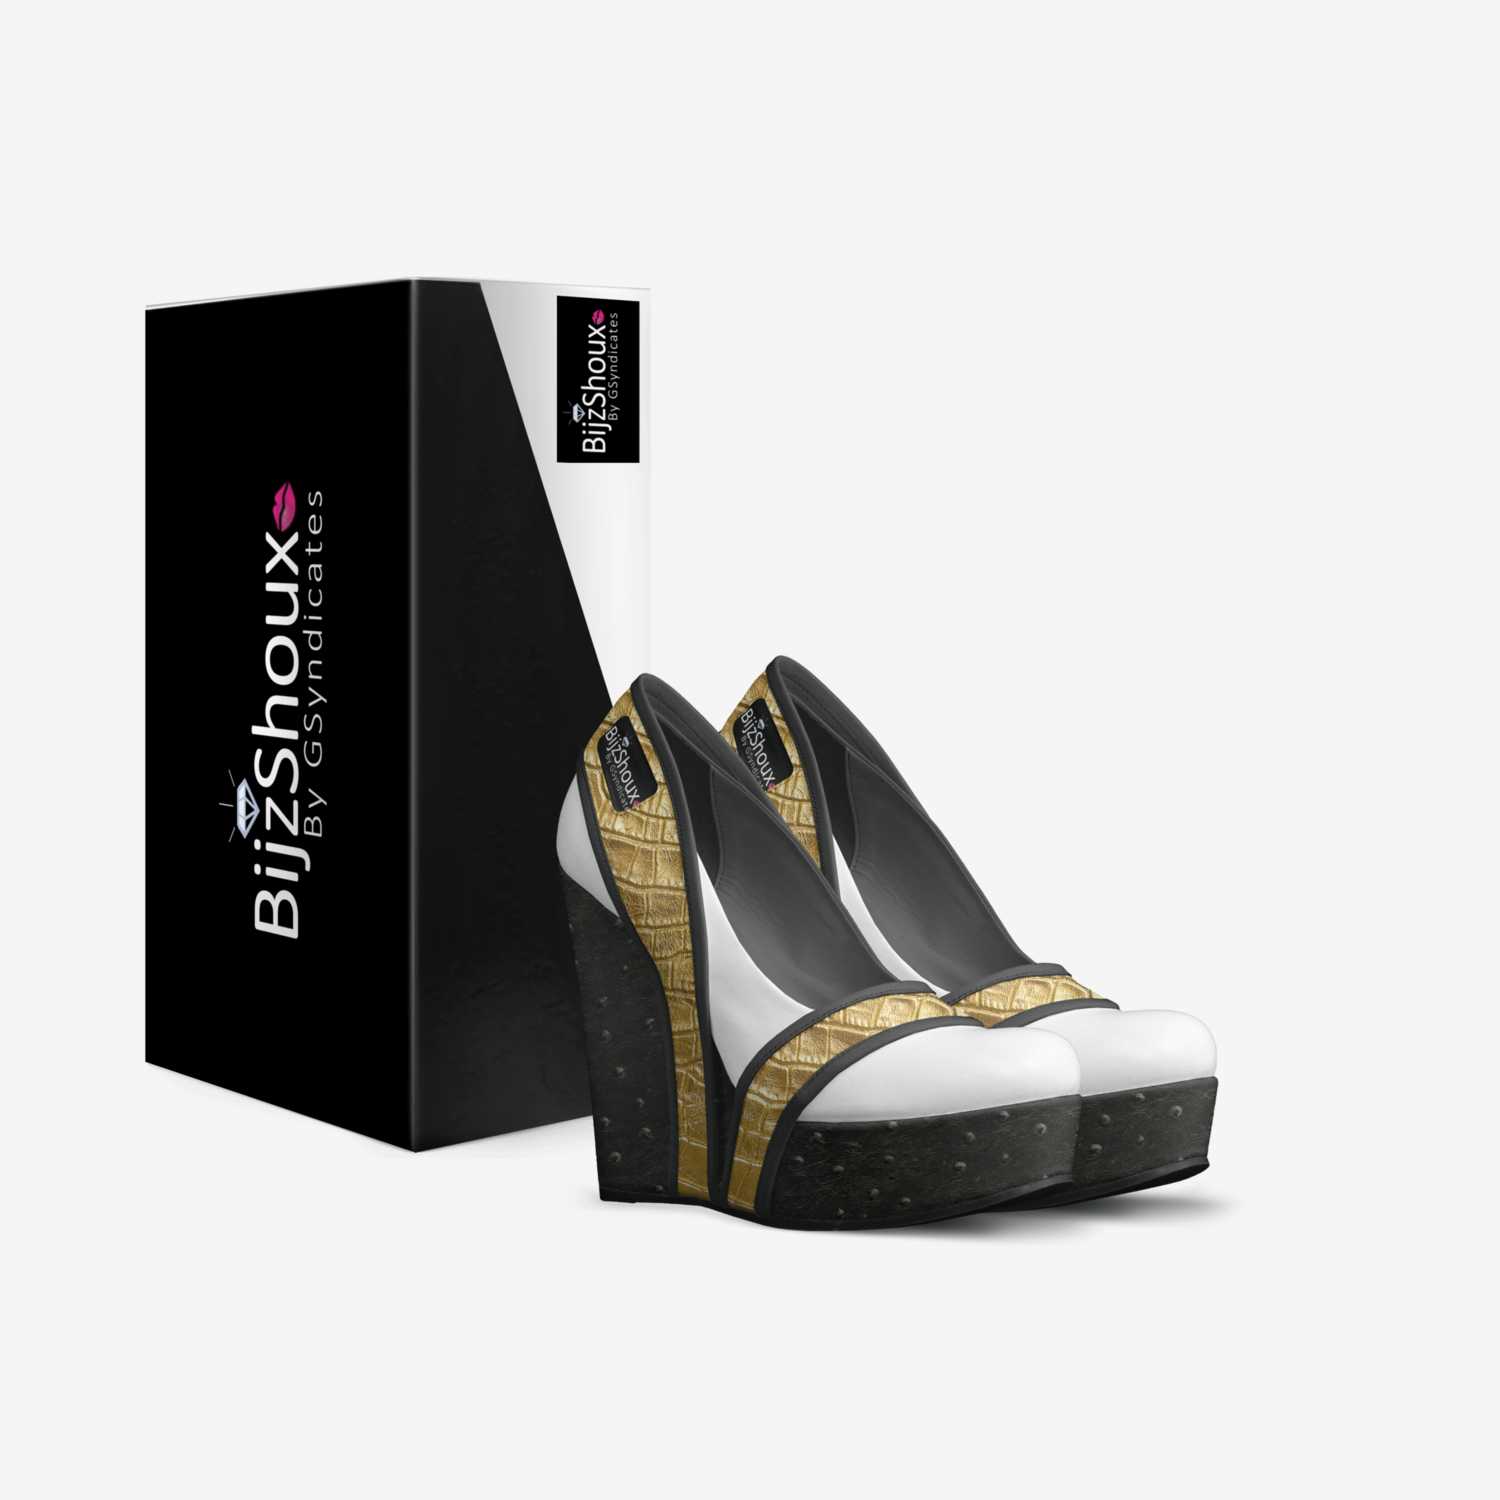 BijzShoux™ custom made in Italy shoes by Shenica Graham | Box view